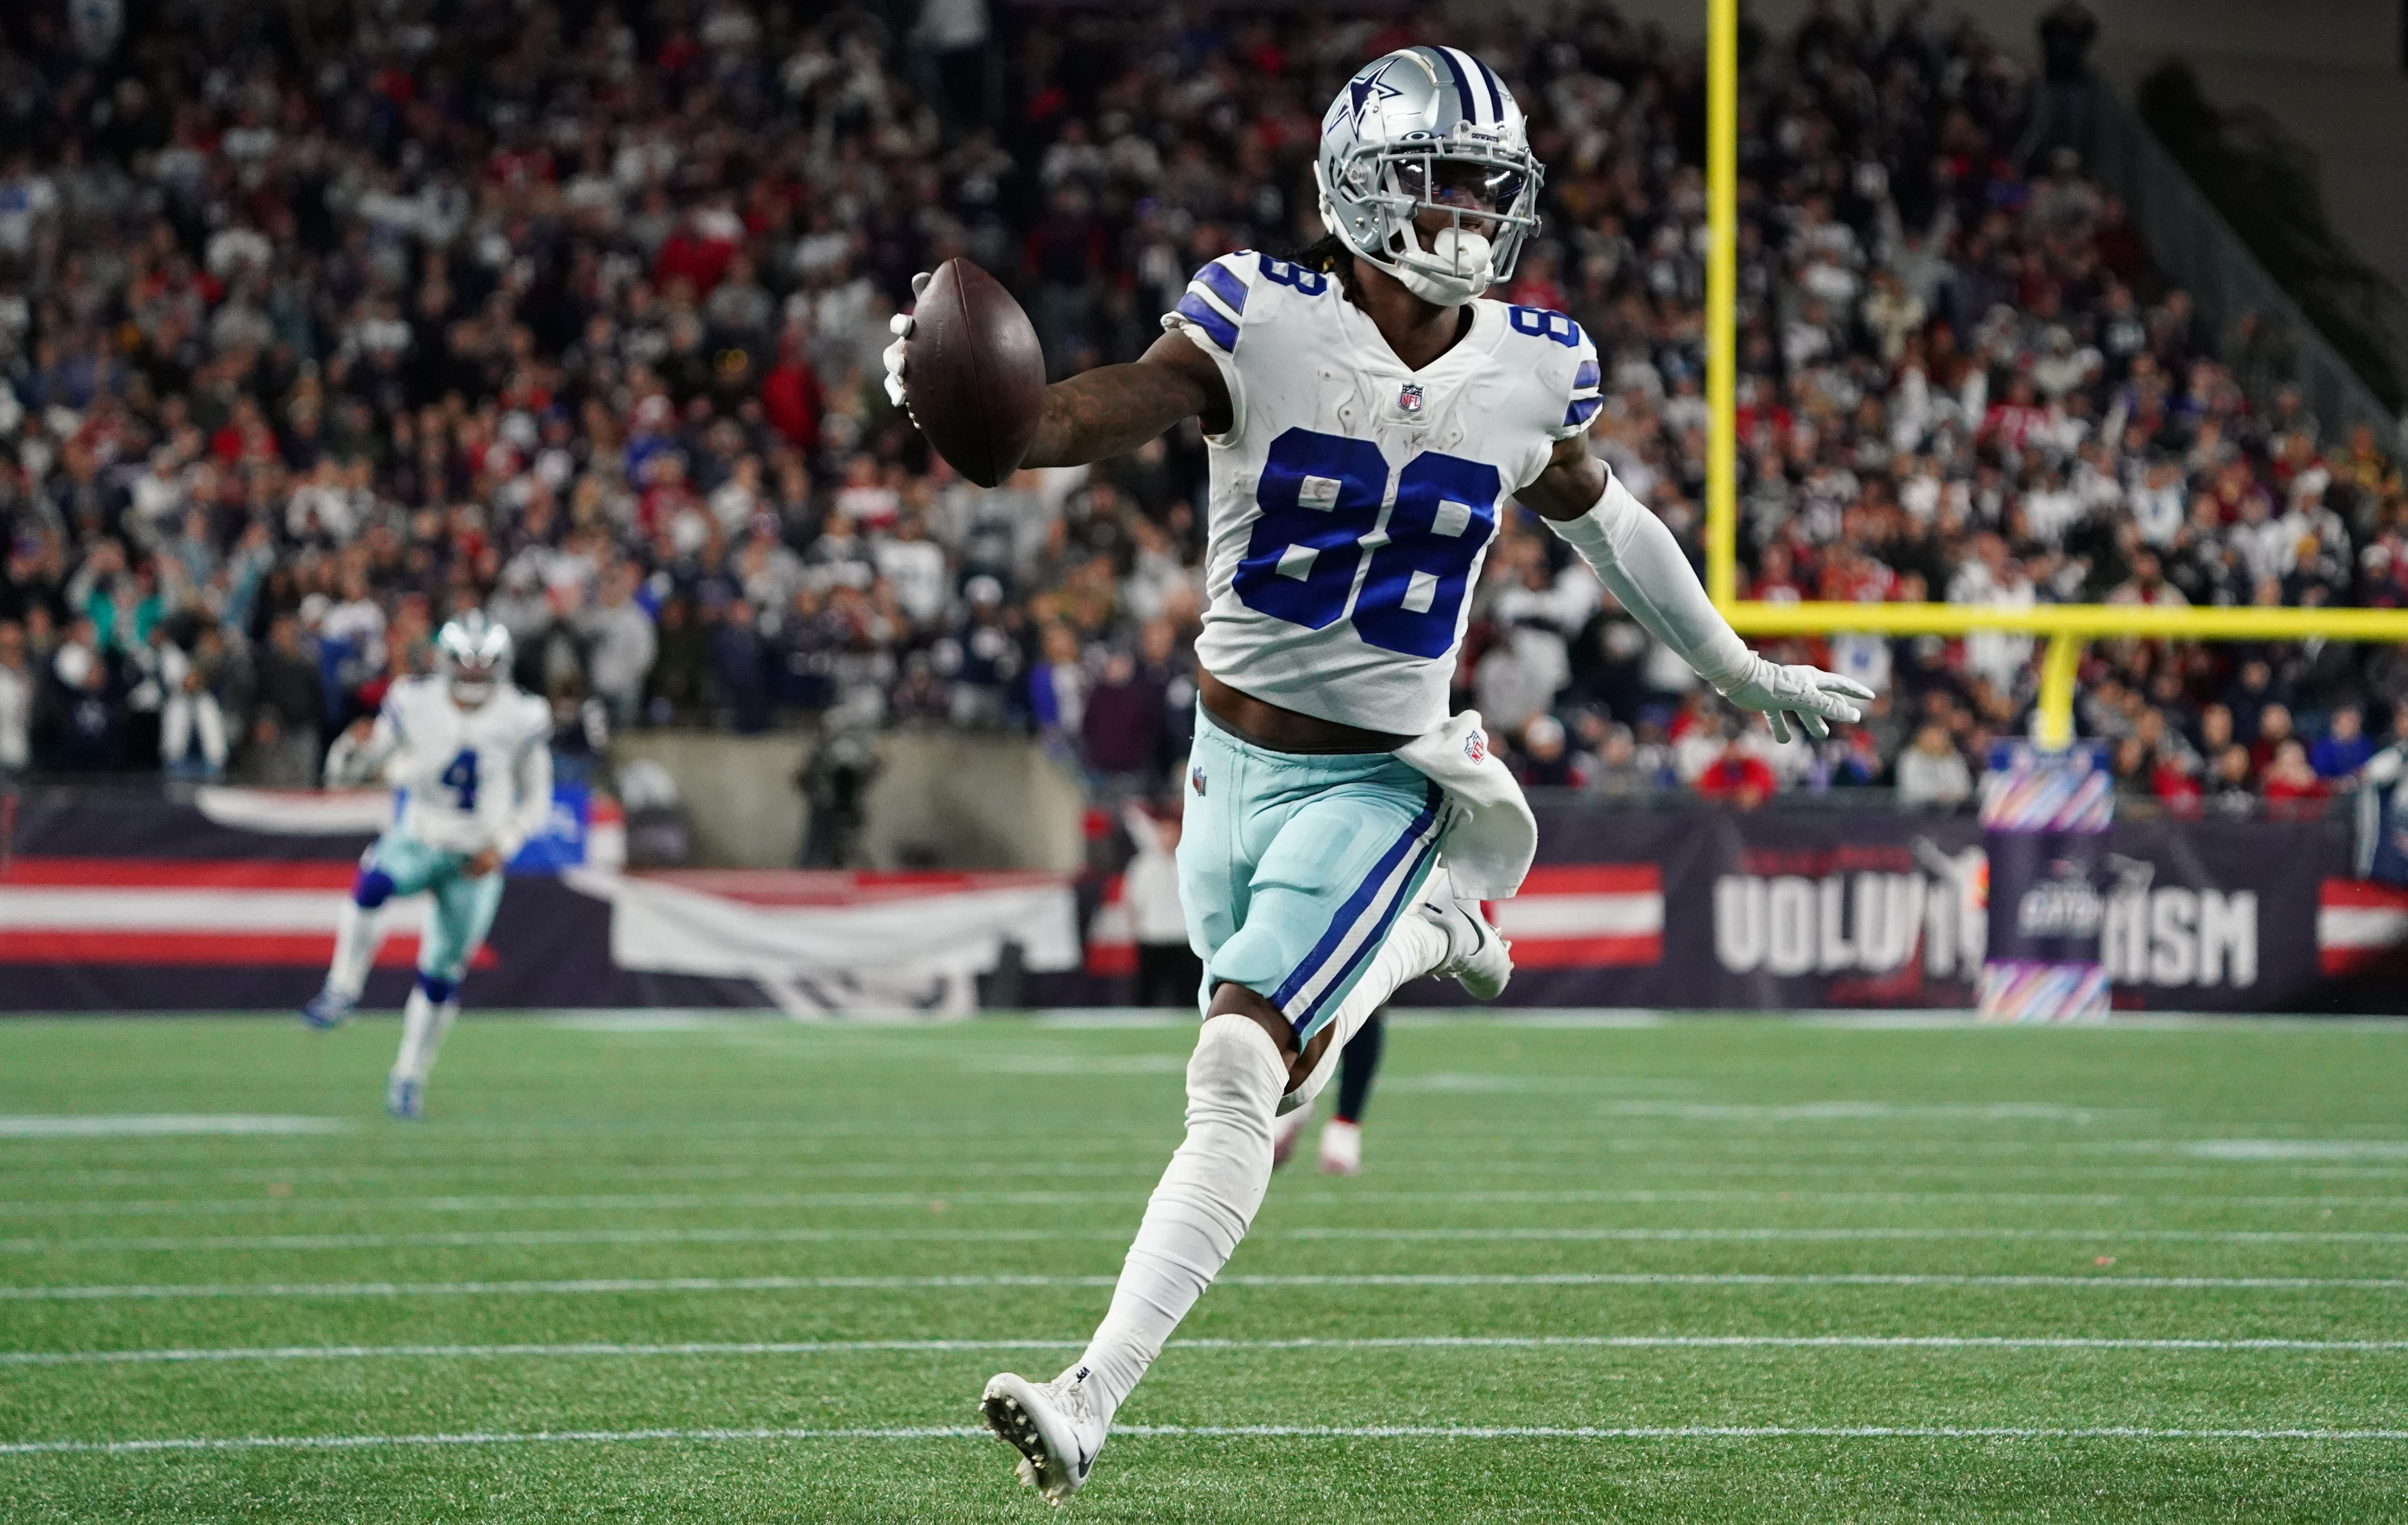 Cowboys WR CeeDee Lamb out with concussion | Reuters